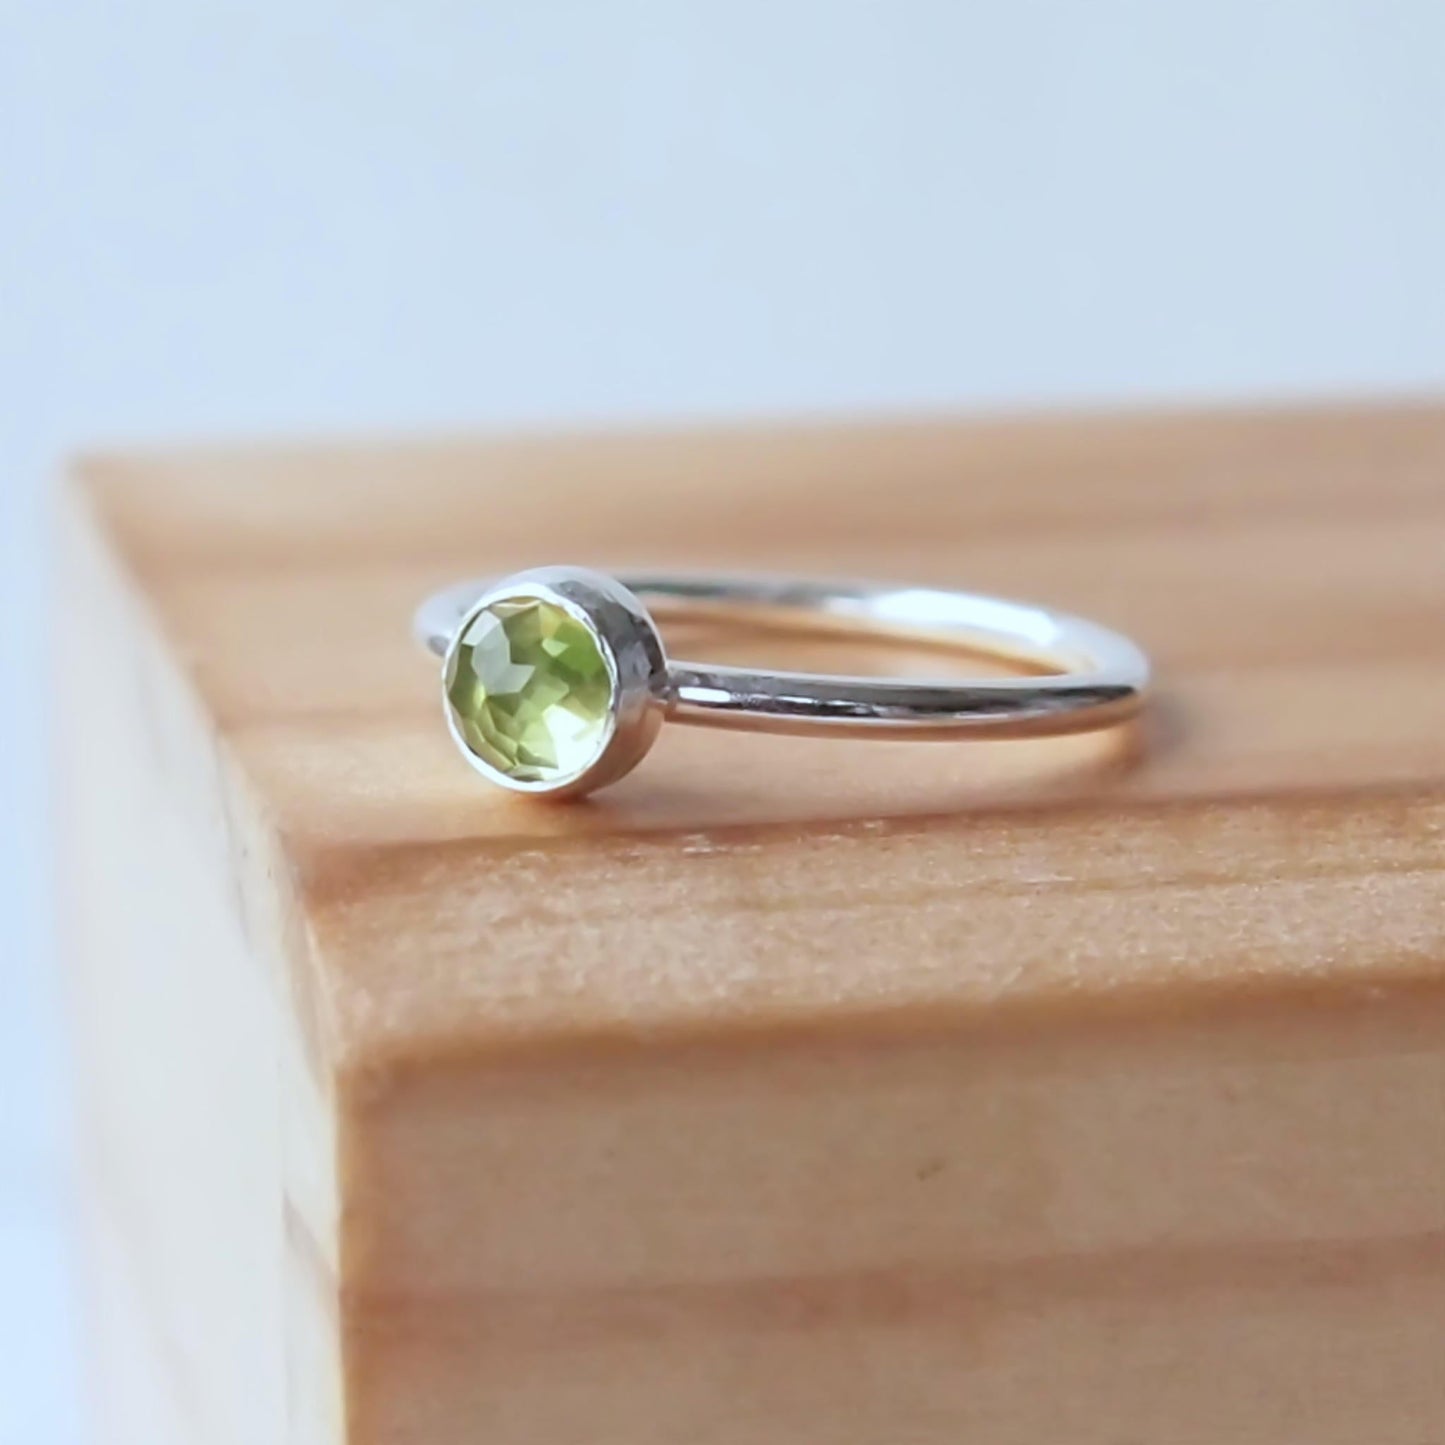 Sterling Silver and pale green Peridot gemstone, a round facet cut cabochon. Simple and minimalist in style. Handmade Jewellery in Edinburgh UK